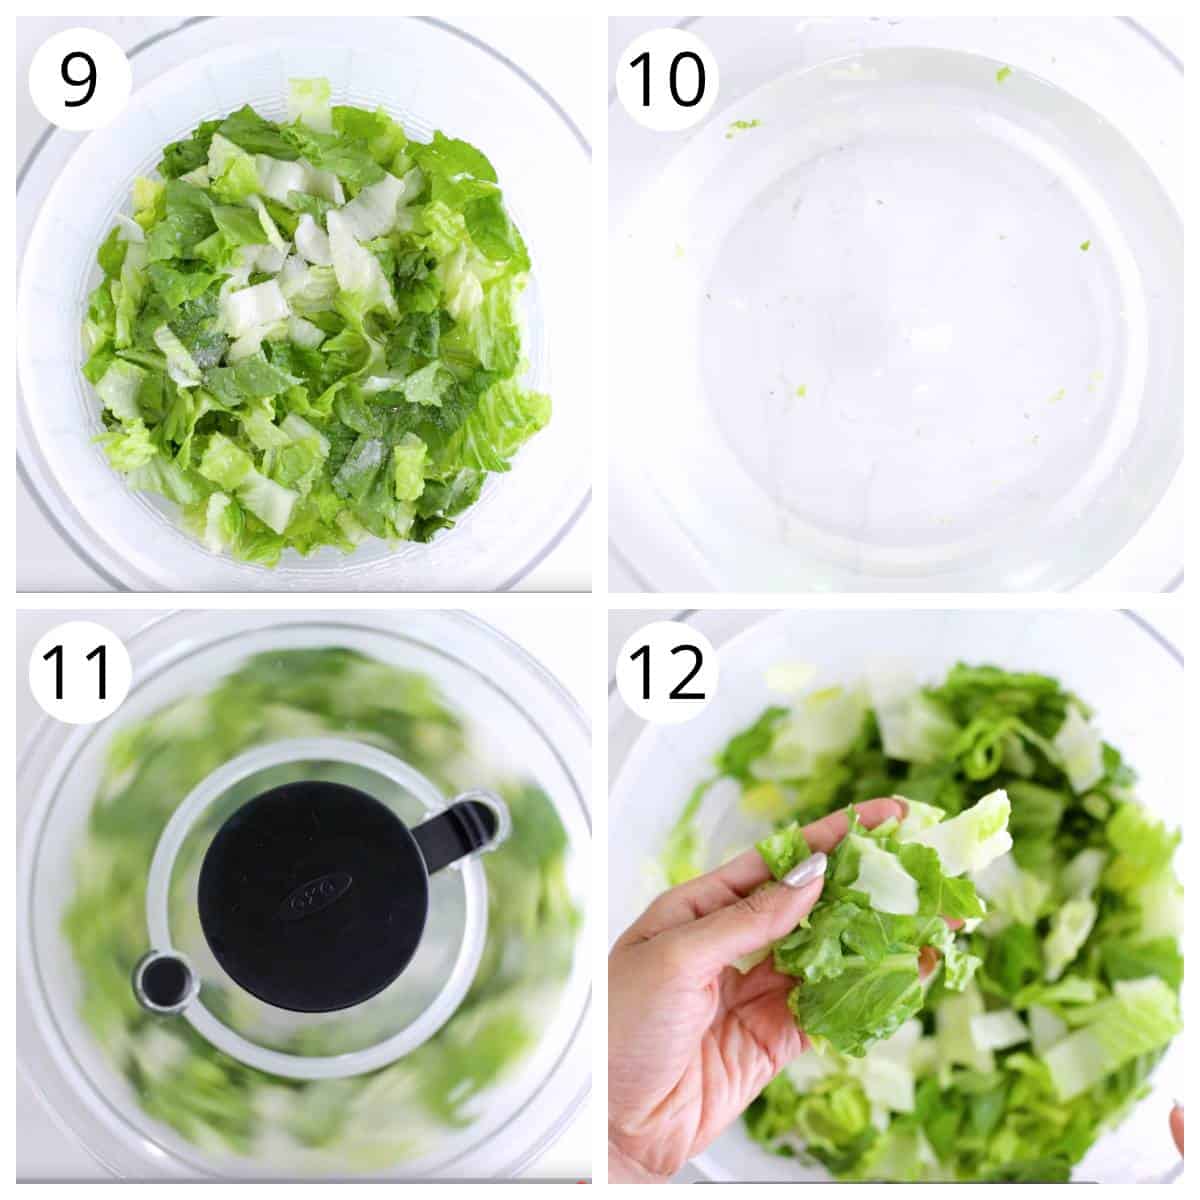 Steps for washing and drying the lettuce in salad spinner for caesar salad